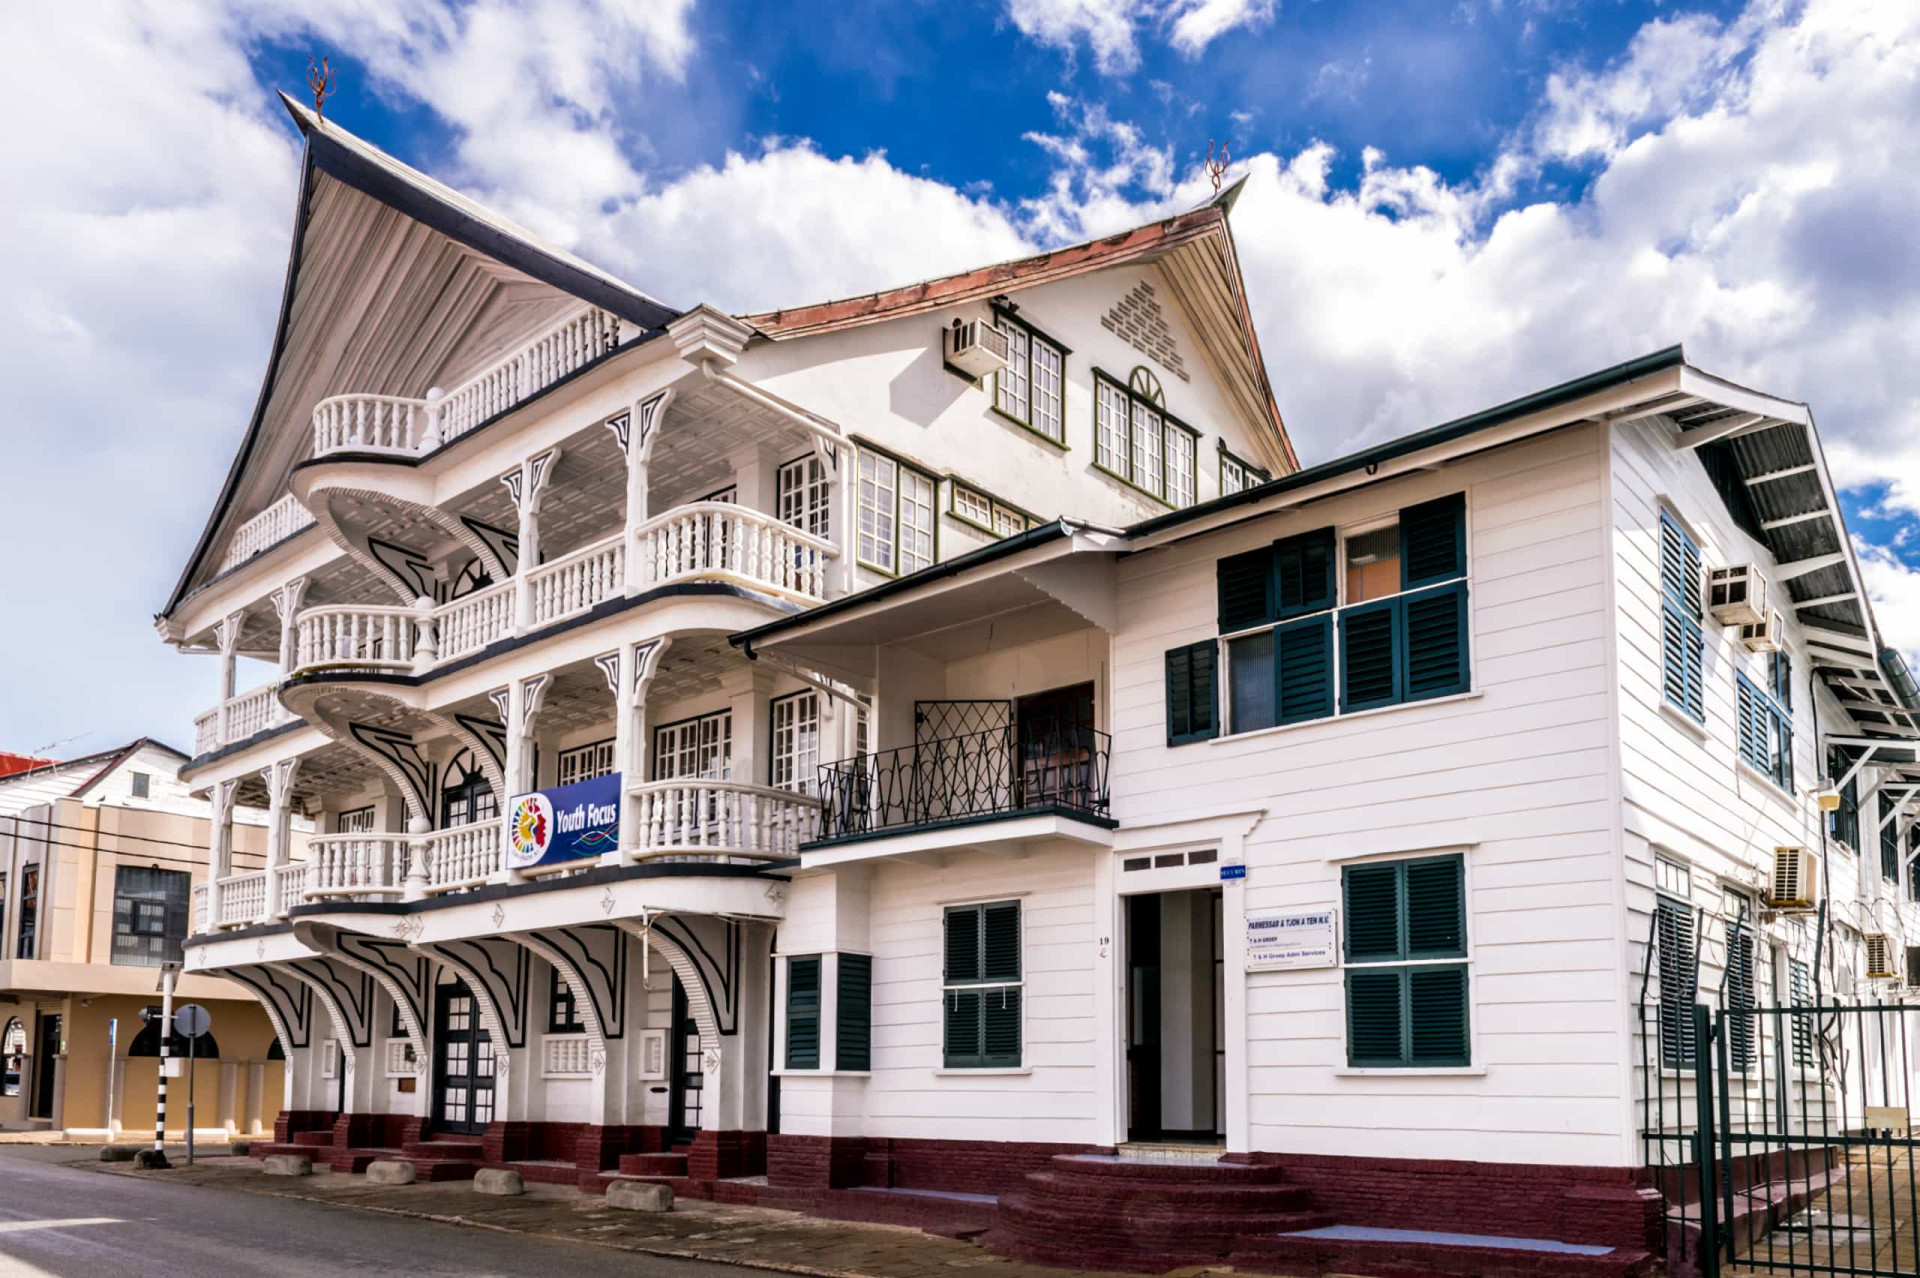 Location: Paramaribo<br>Criteria: Cultural<br>Year established: 2001<br>Description: The Dutch settled here in the 17th century, and their cultural influence is apparent in the old quarter's unique street plan and traditional architectural design signatures.<p>You may also like:<a href="https://www.starsinsider.com/n/221330?utm_source=msn.com&utm_medium=display&utm_campaign=referral_description&utm_content=413555v12en-us"> Most famous last words </a></p>